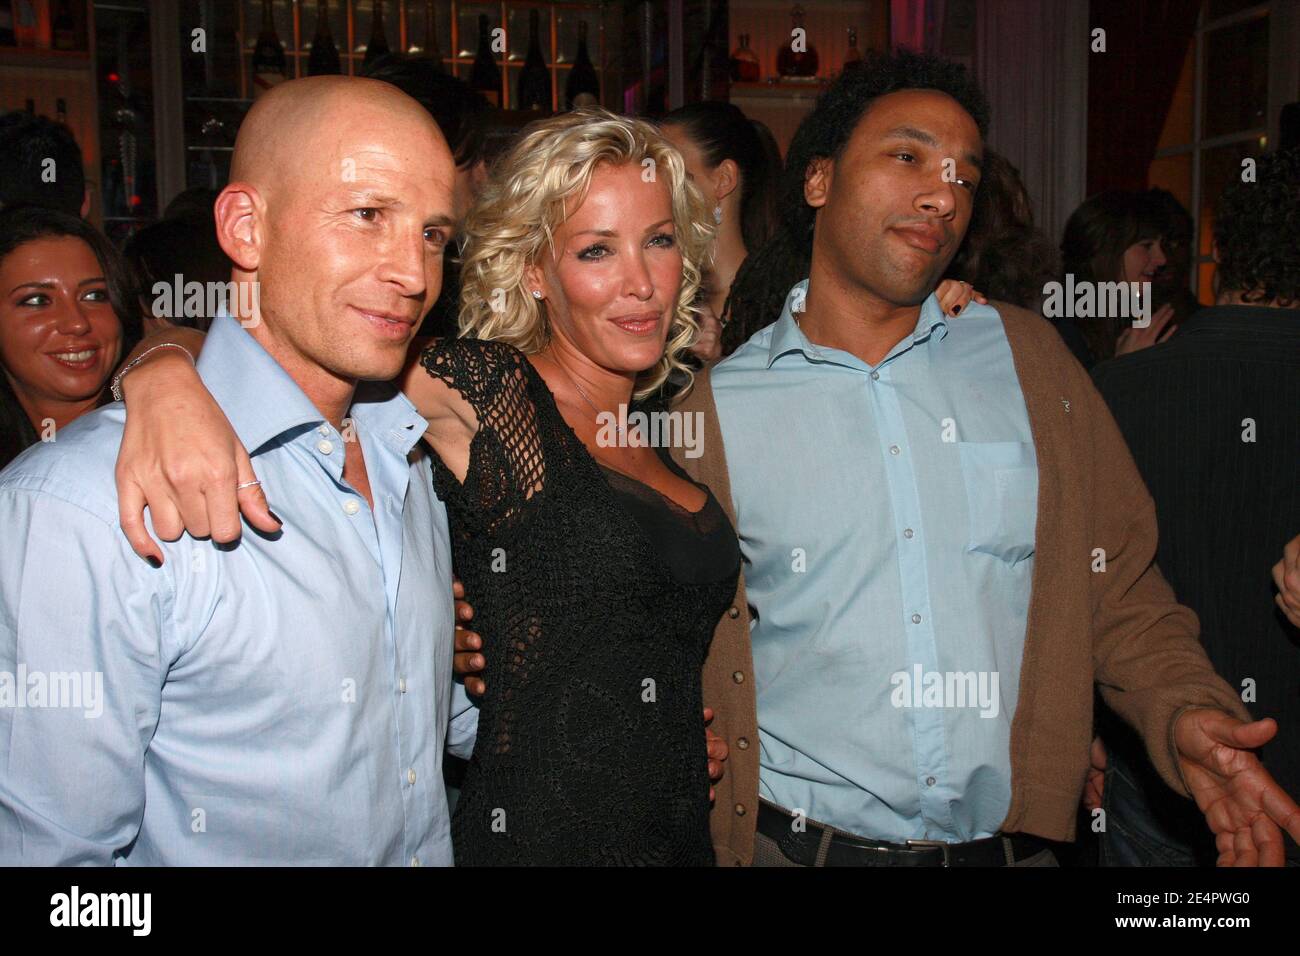 French kick boxing champion Dida Diafat with French singer Doc Gyneco  attend Ophelie Winter's birthday party at the restaurant 'Pershing Hall' in  Paris, France on February 20, 2008. Photo by Benoit Pinguet/ABACAPRESS.COM